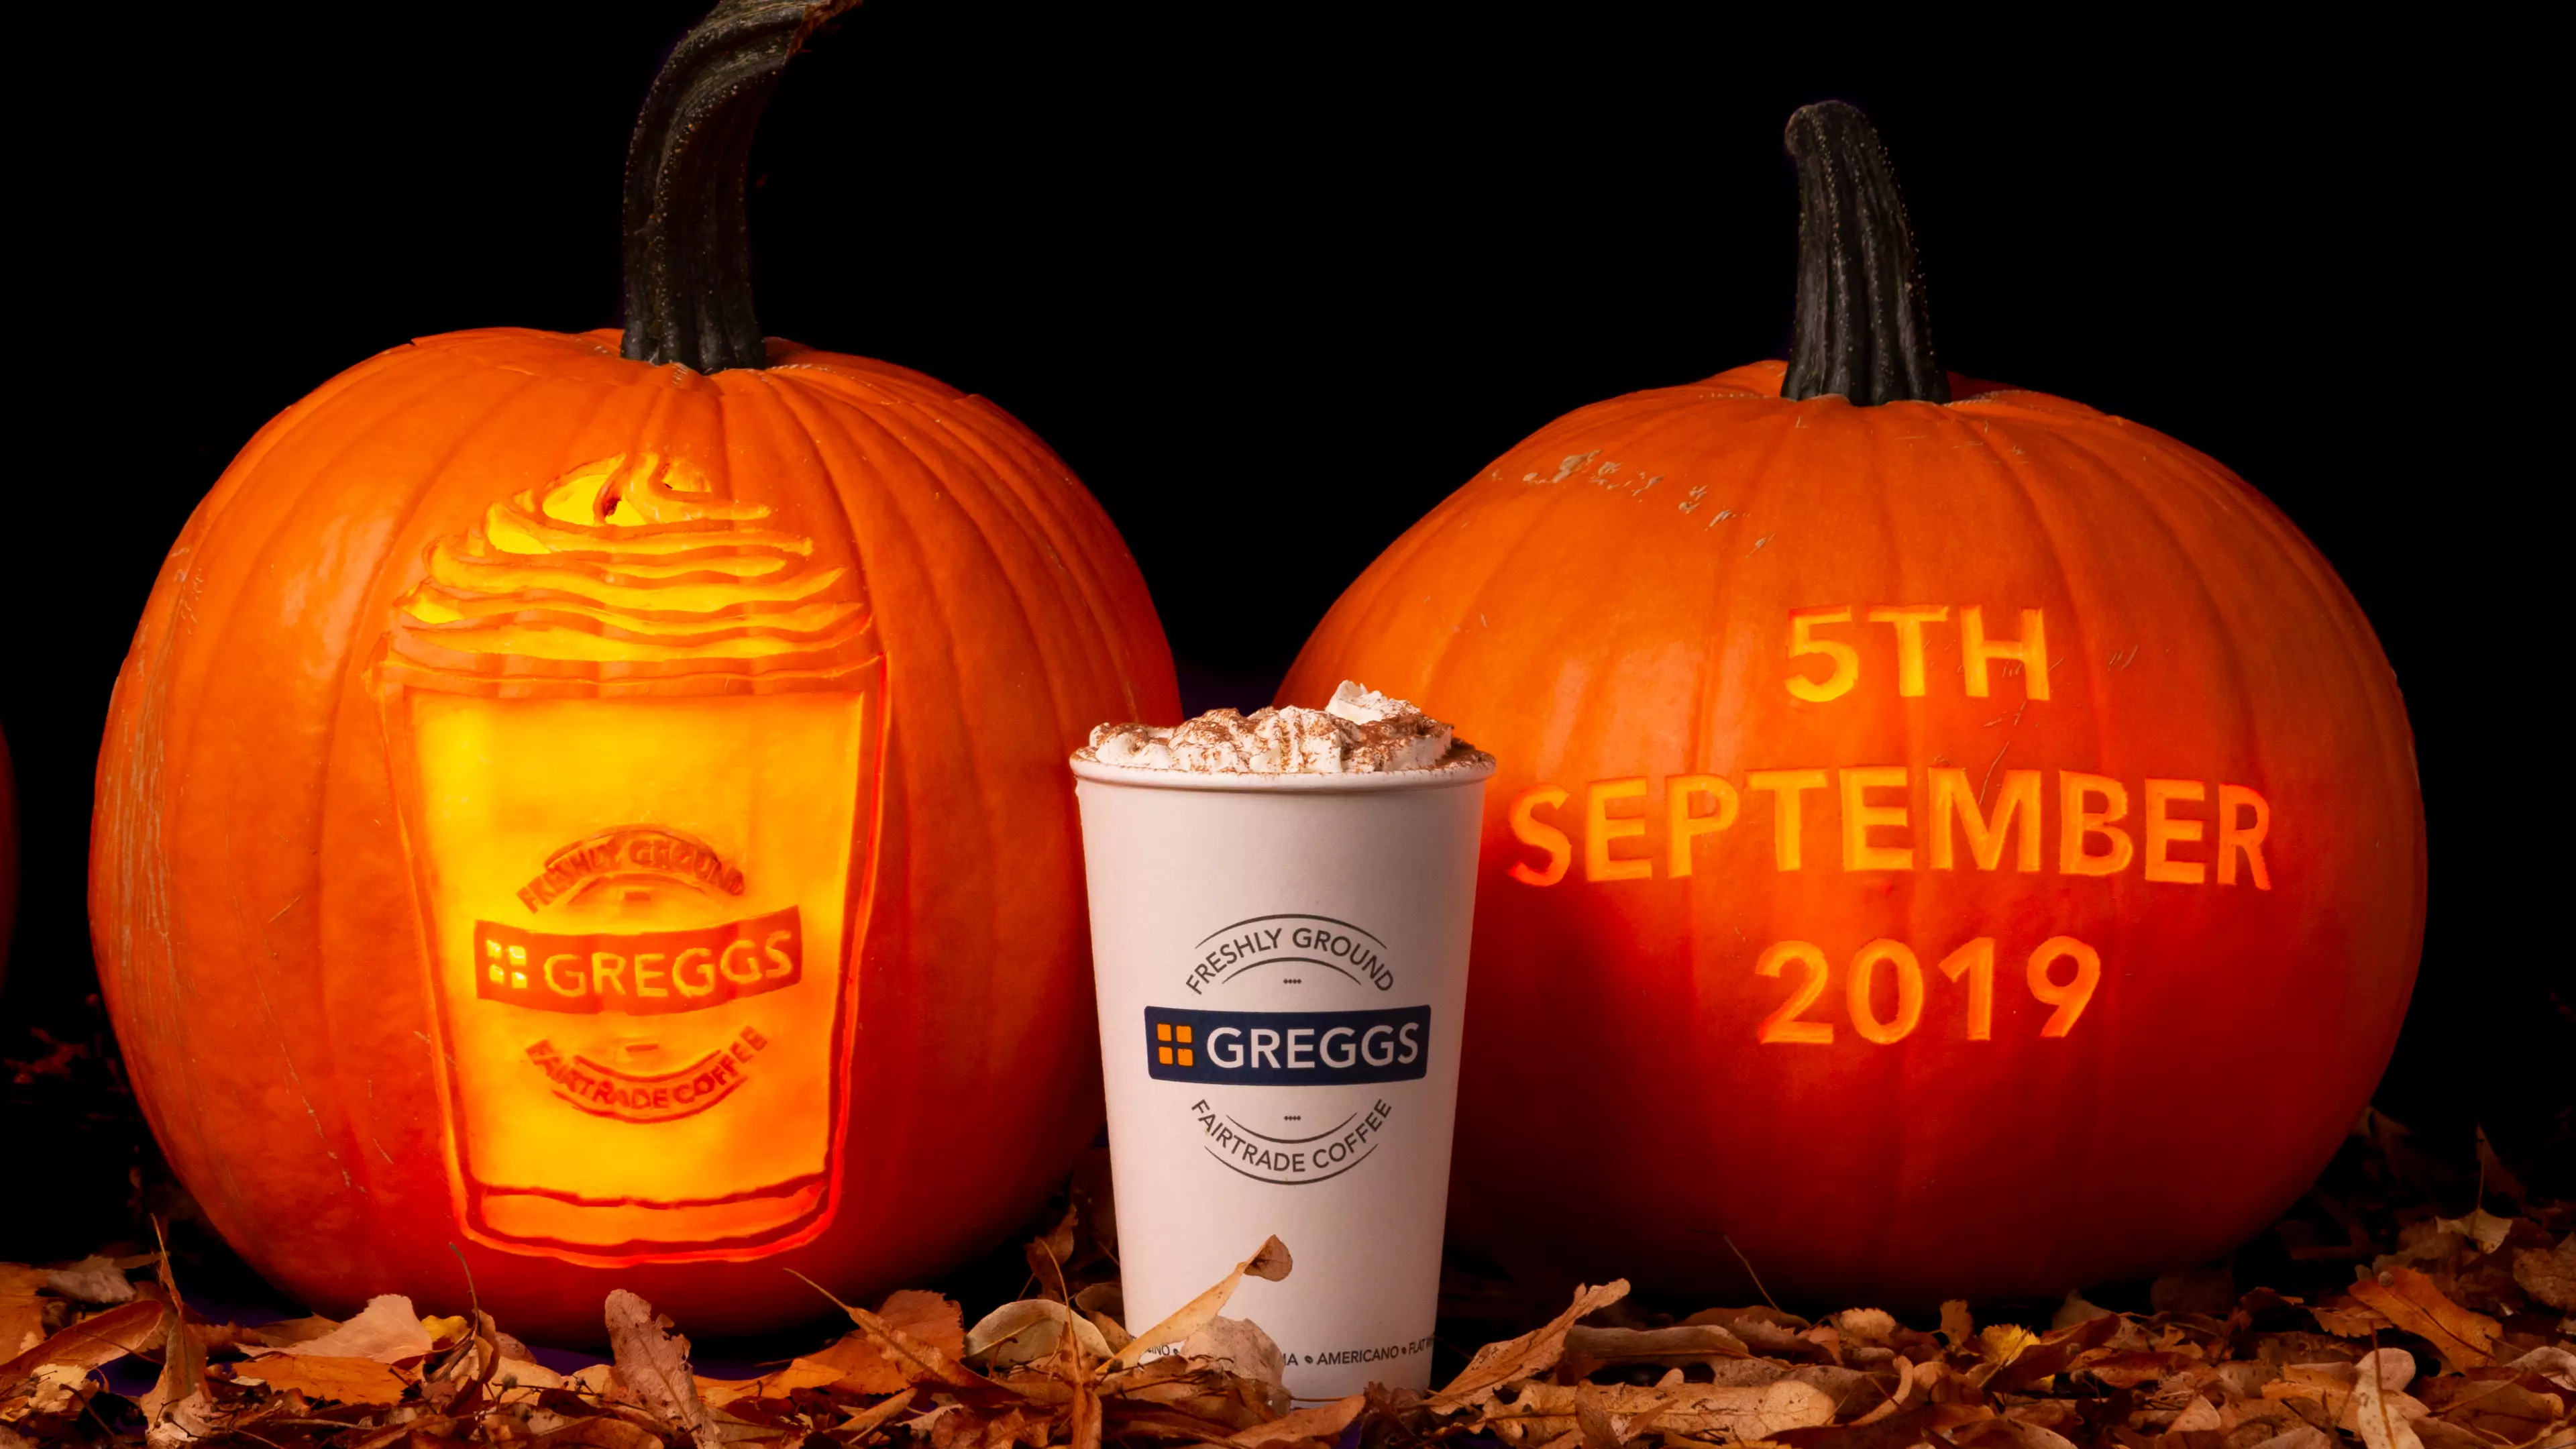 Greggs Has Launched Its Autumn Menu And It Looks Every Bit As Tasty As We Expected